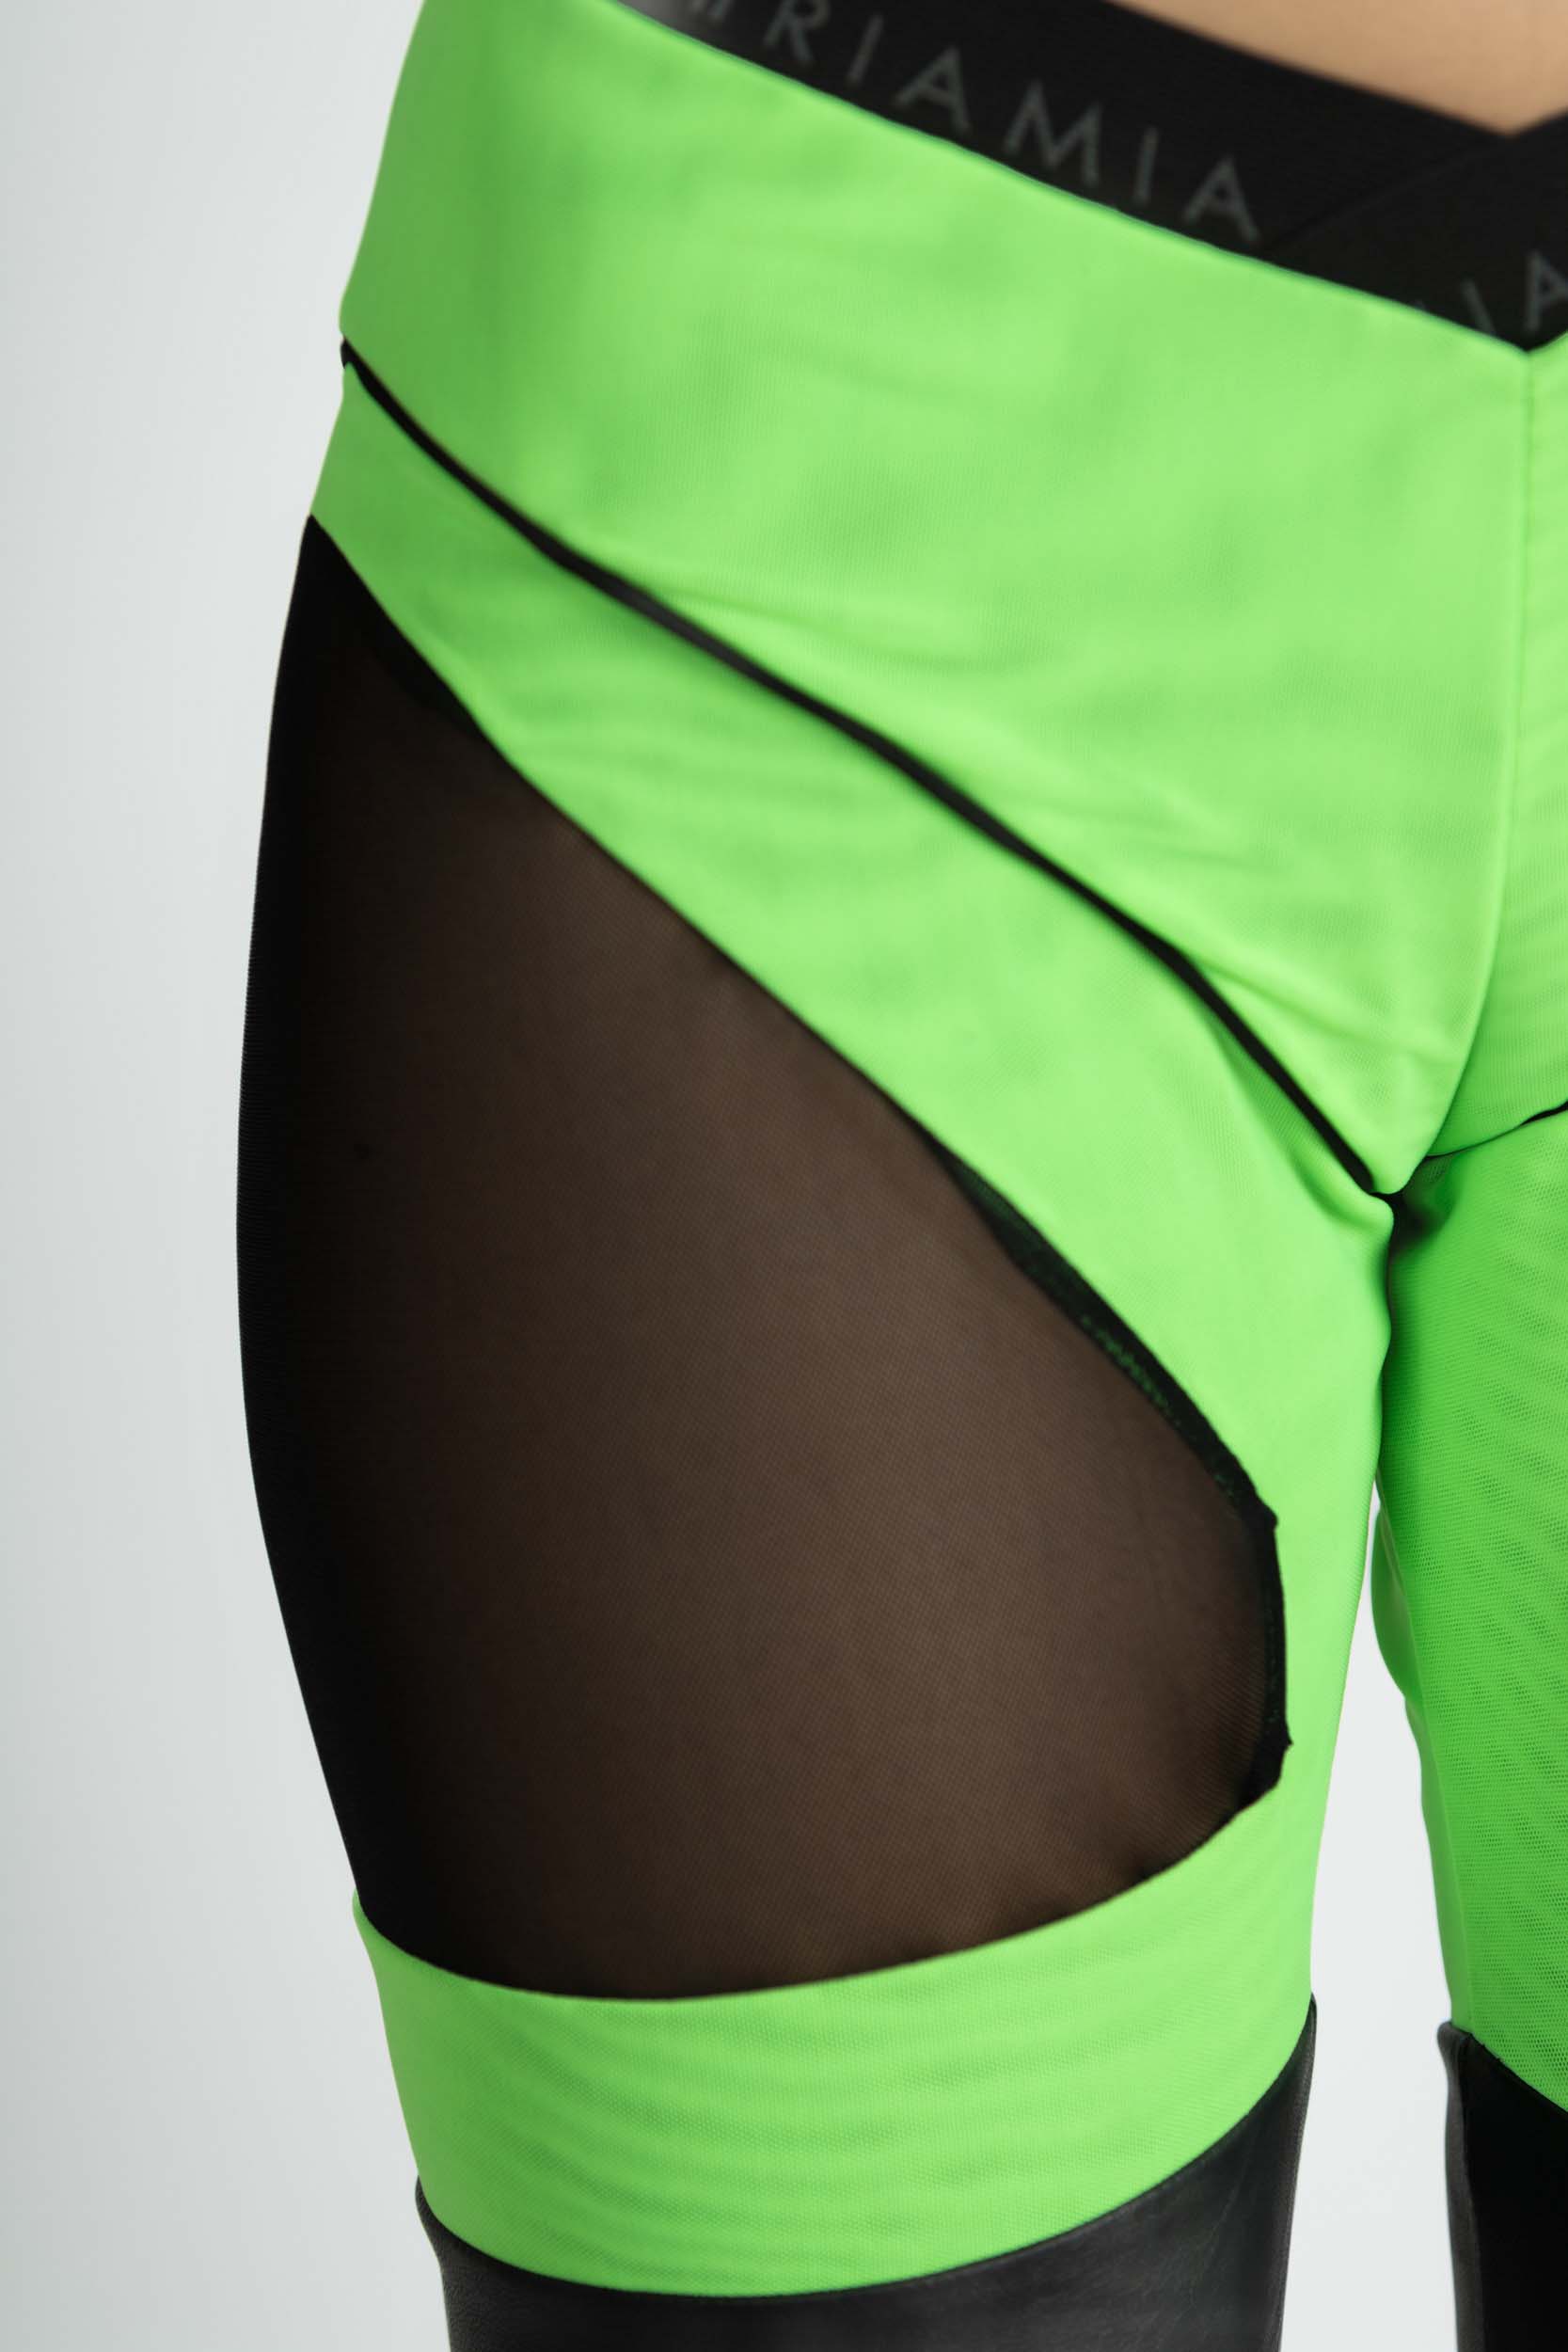 Leggings with combination of fabrics in black and neon green. Englared photo highlighting its details.